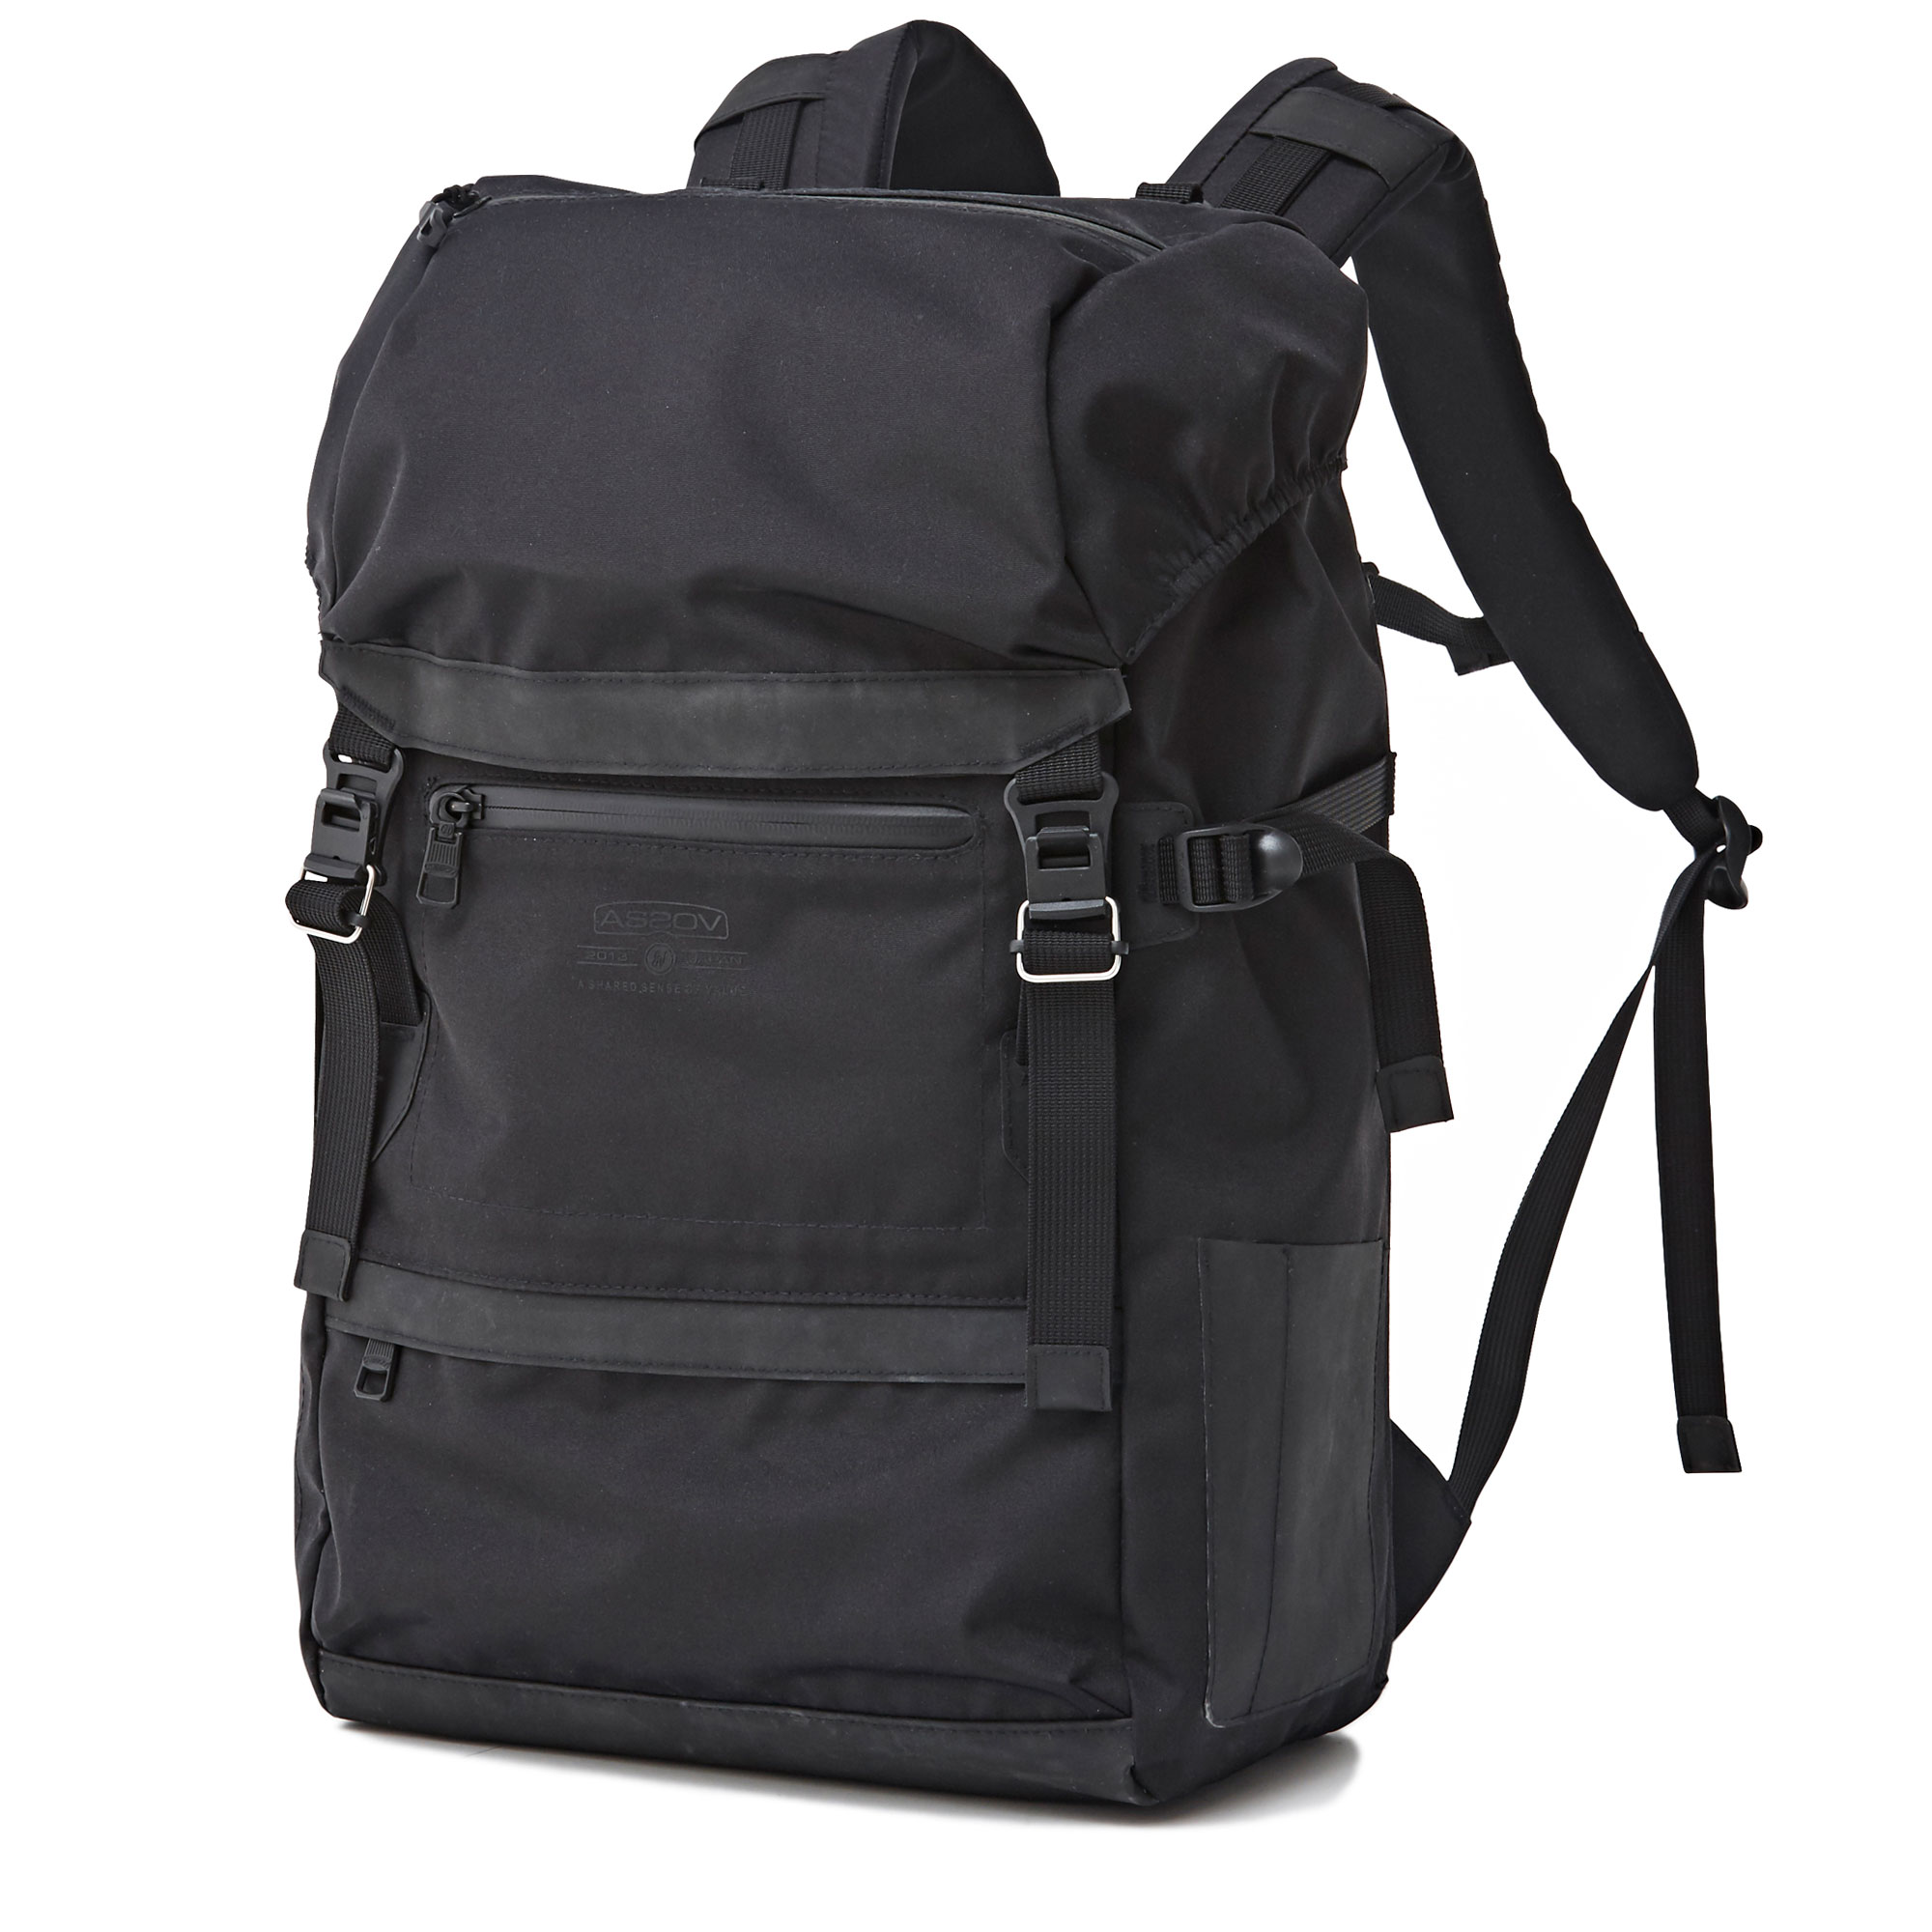 WATER PROOF CORDURA 305D BACK PACK